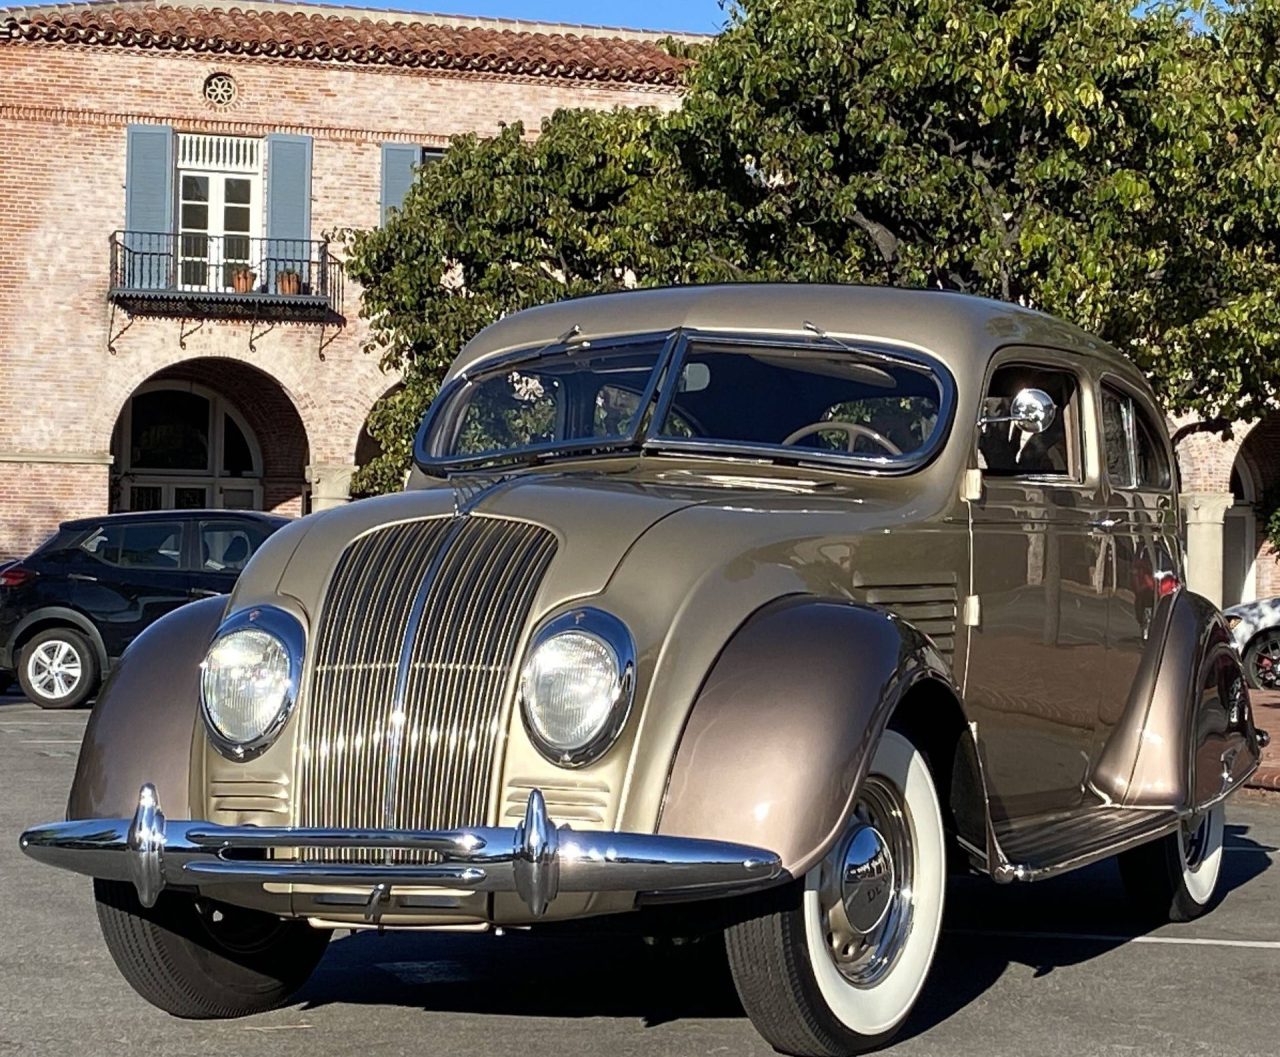 Rare DeSoto Airflow takes center stage at Palm Springs Car Show and Auction